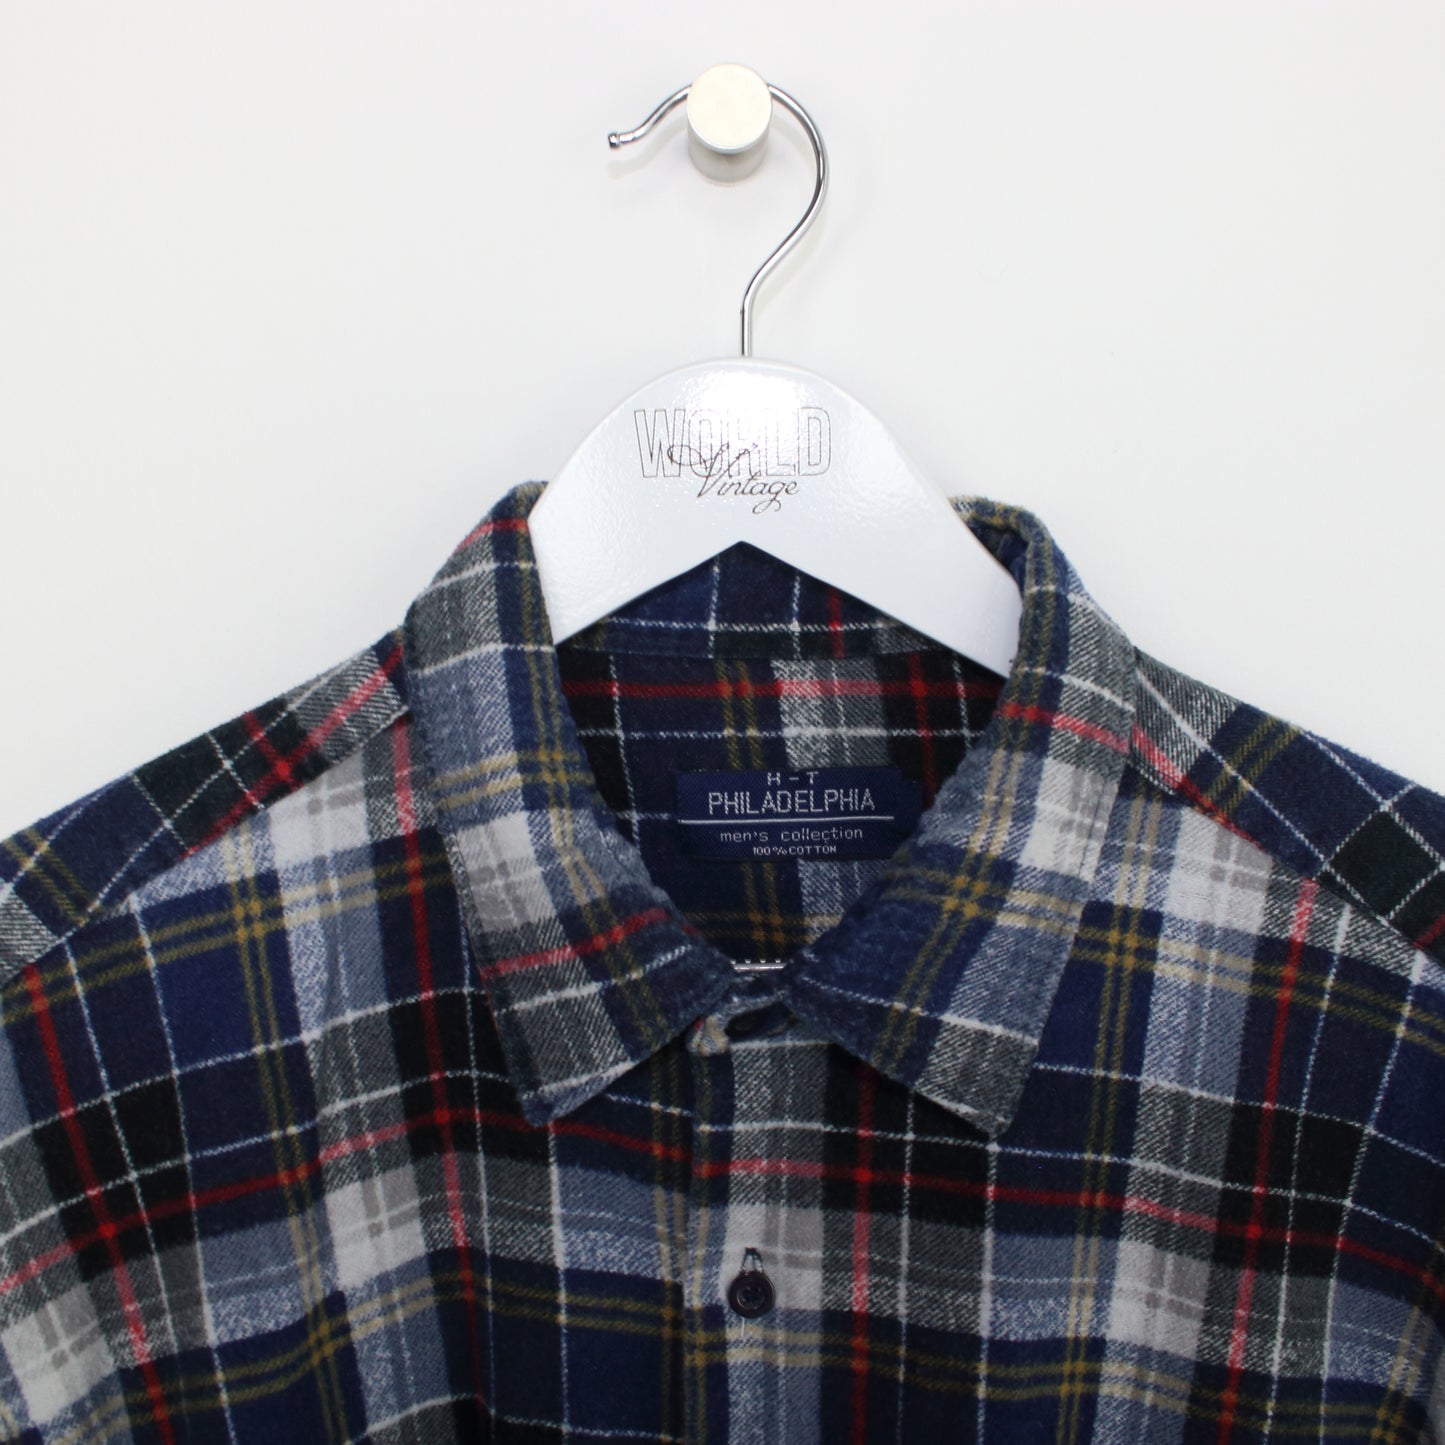 Vintage Philadelphia flannel shirt in checked blue, grey and red. Best fits XL